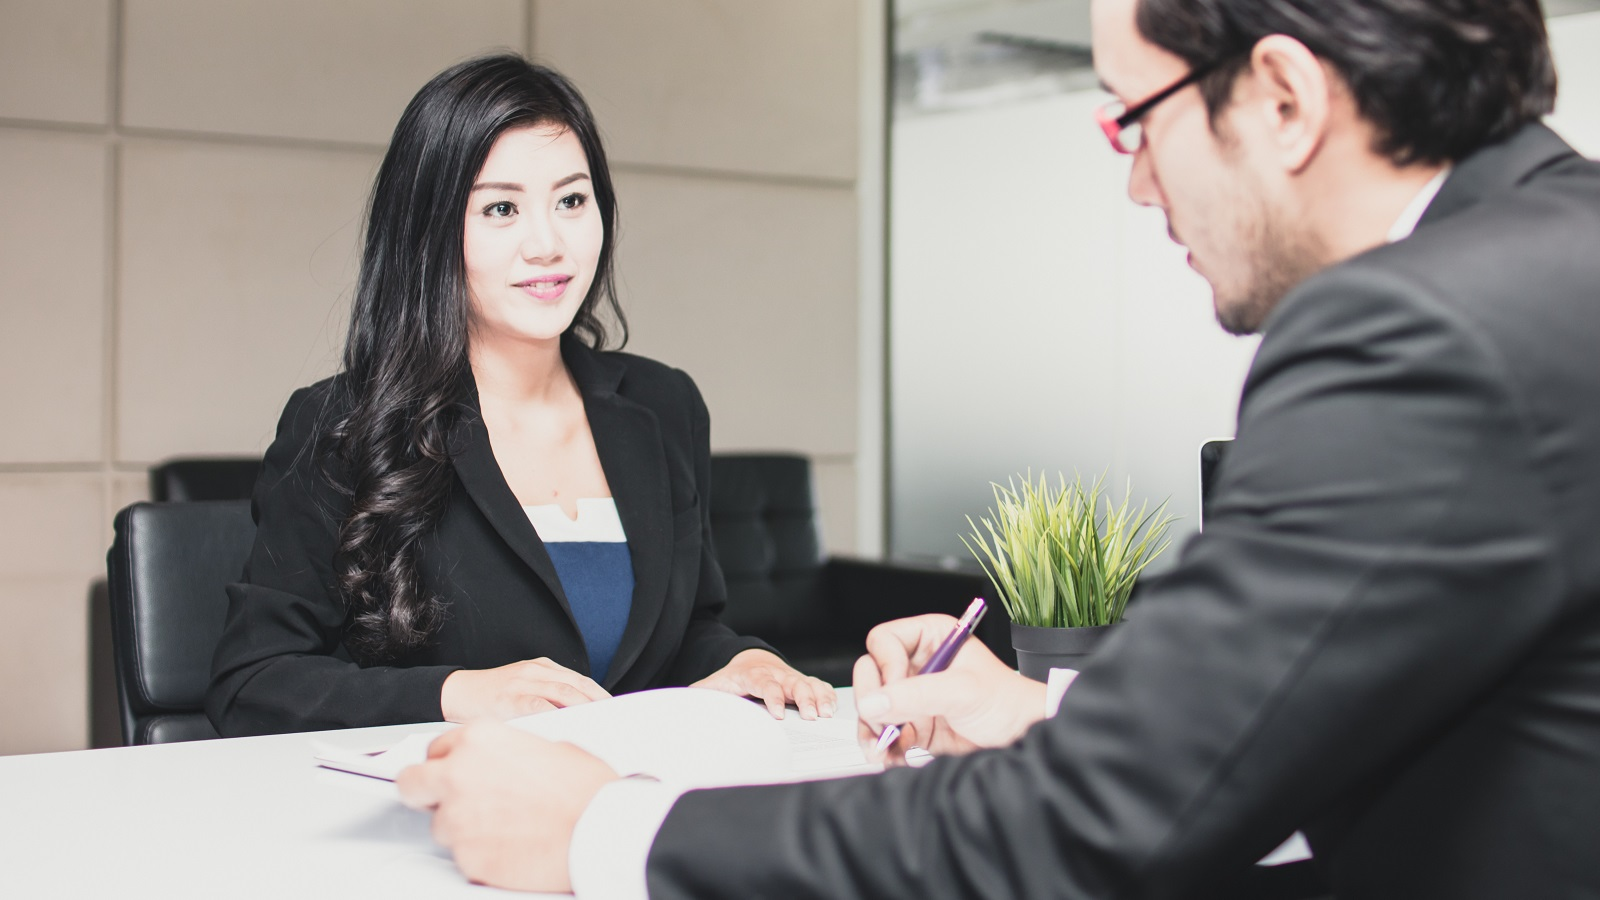 5 Tips To Ace Your Next Interview And Land The Job